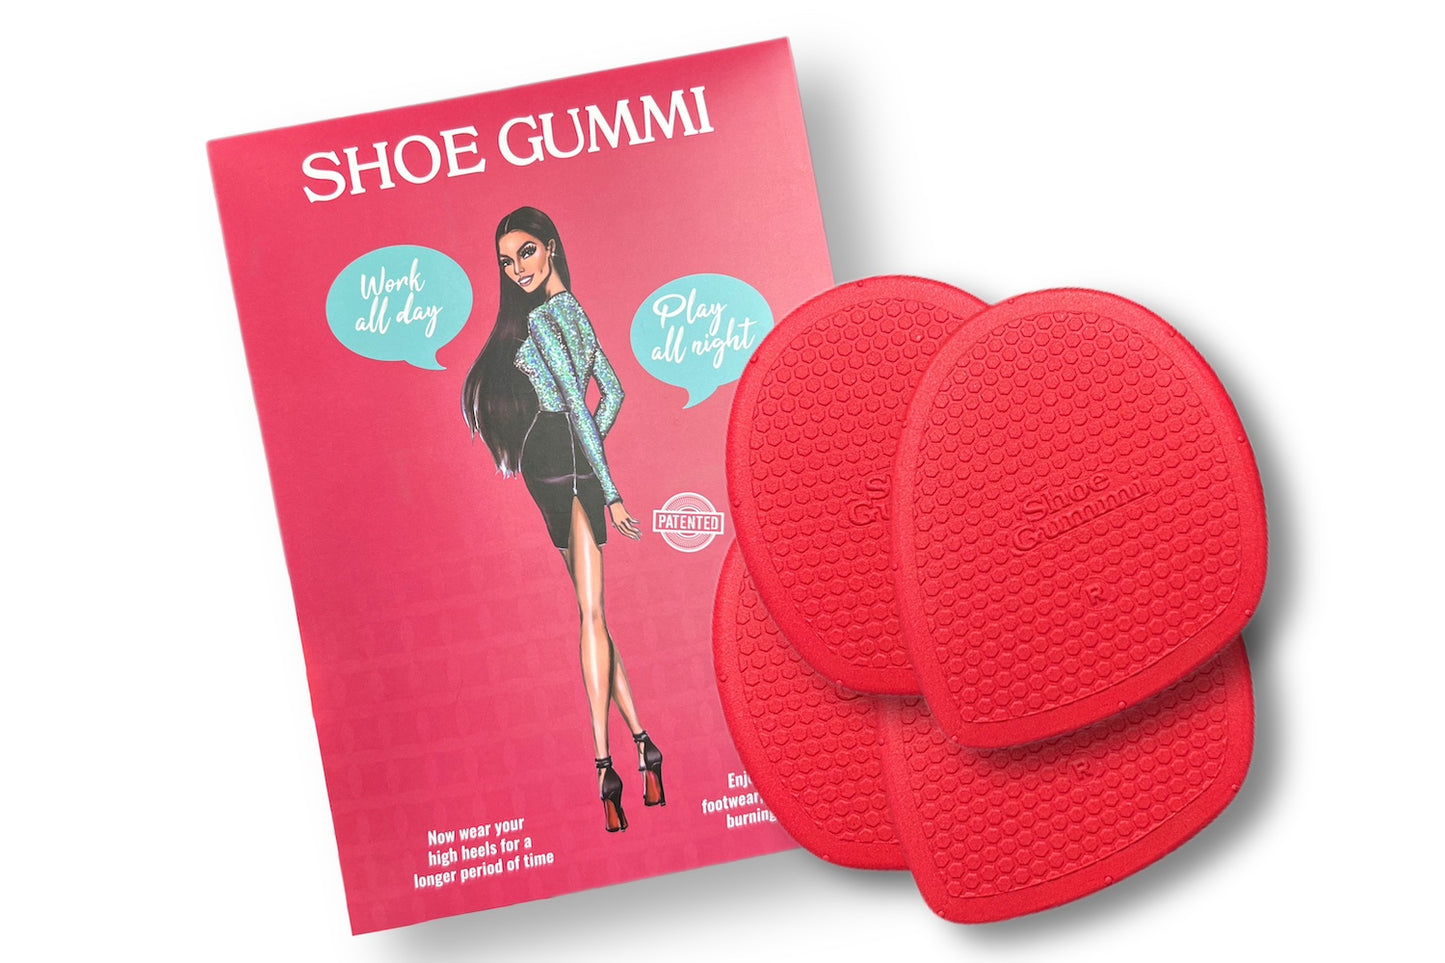 SHOE GUMMI (ROUNDED RED)